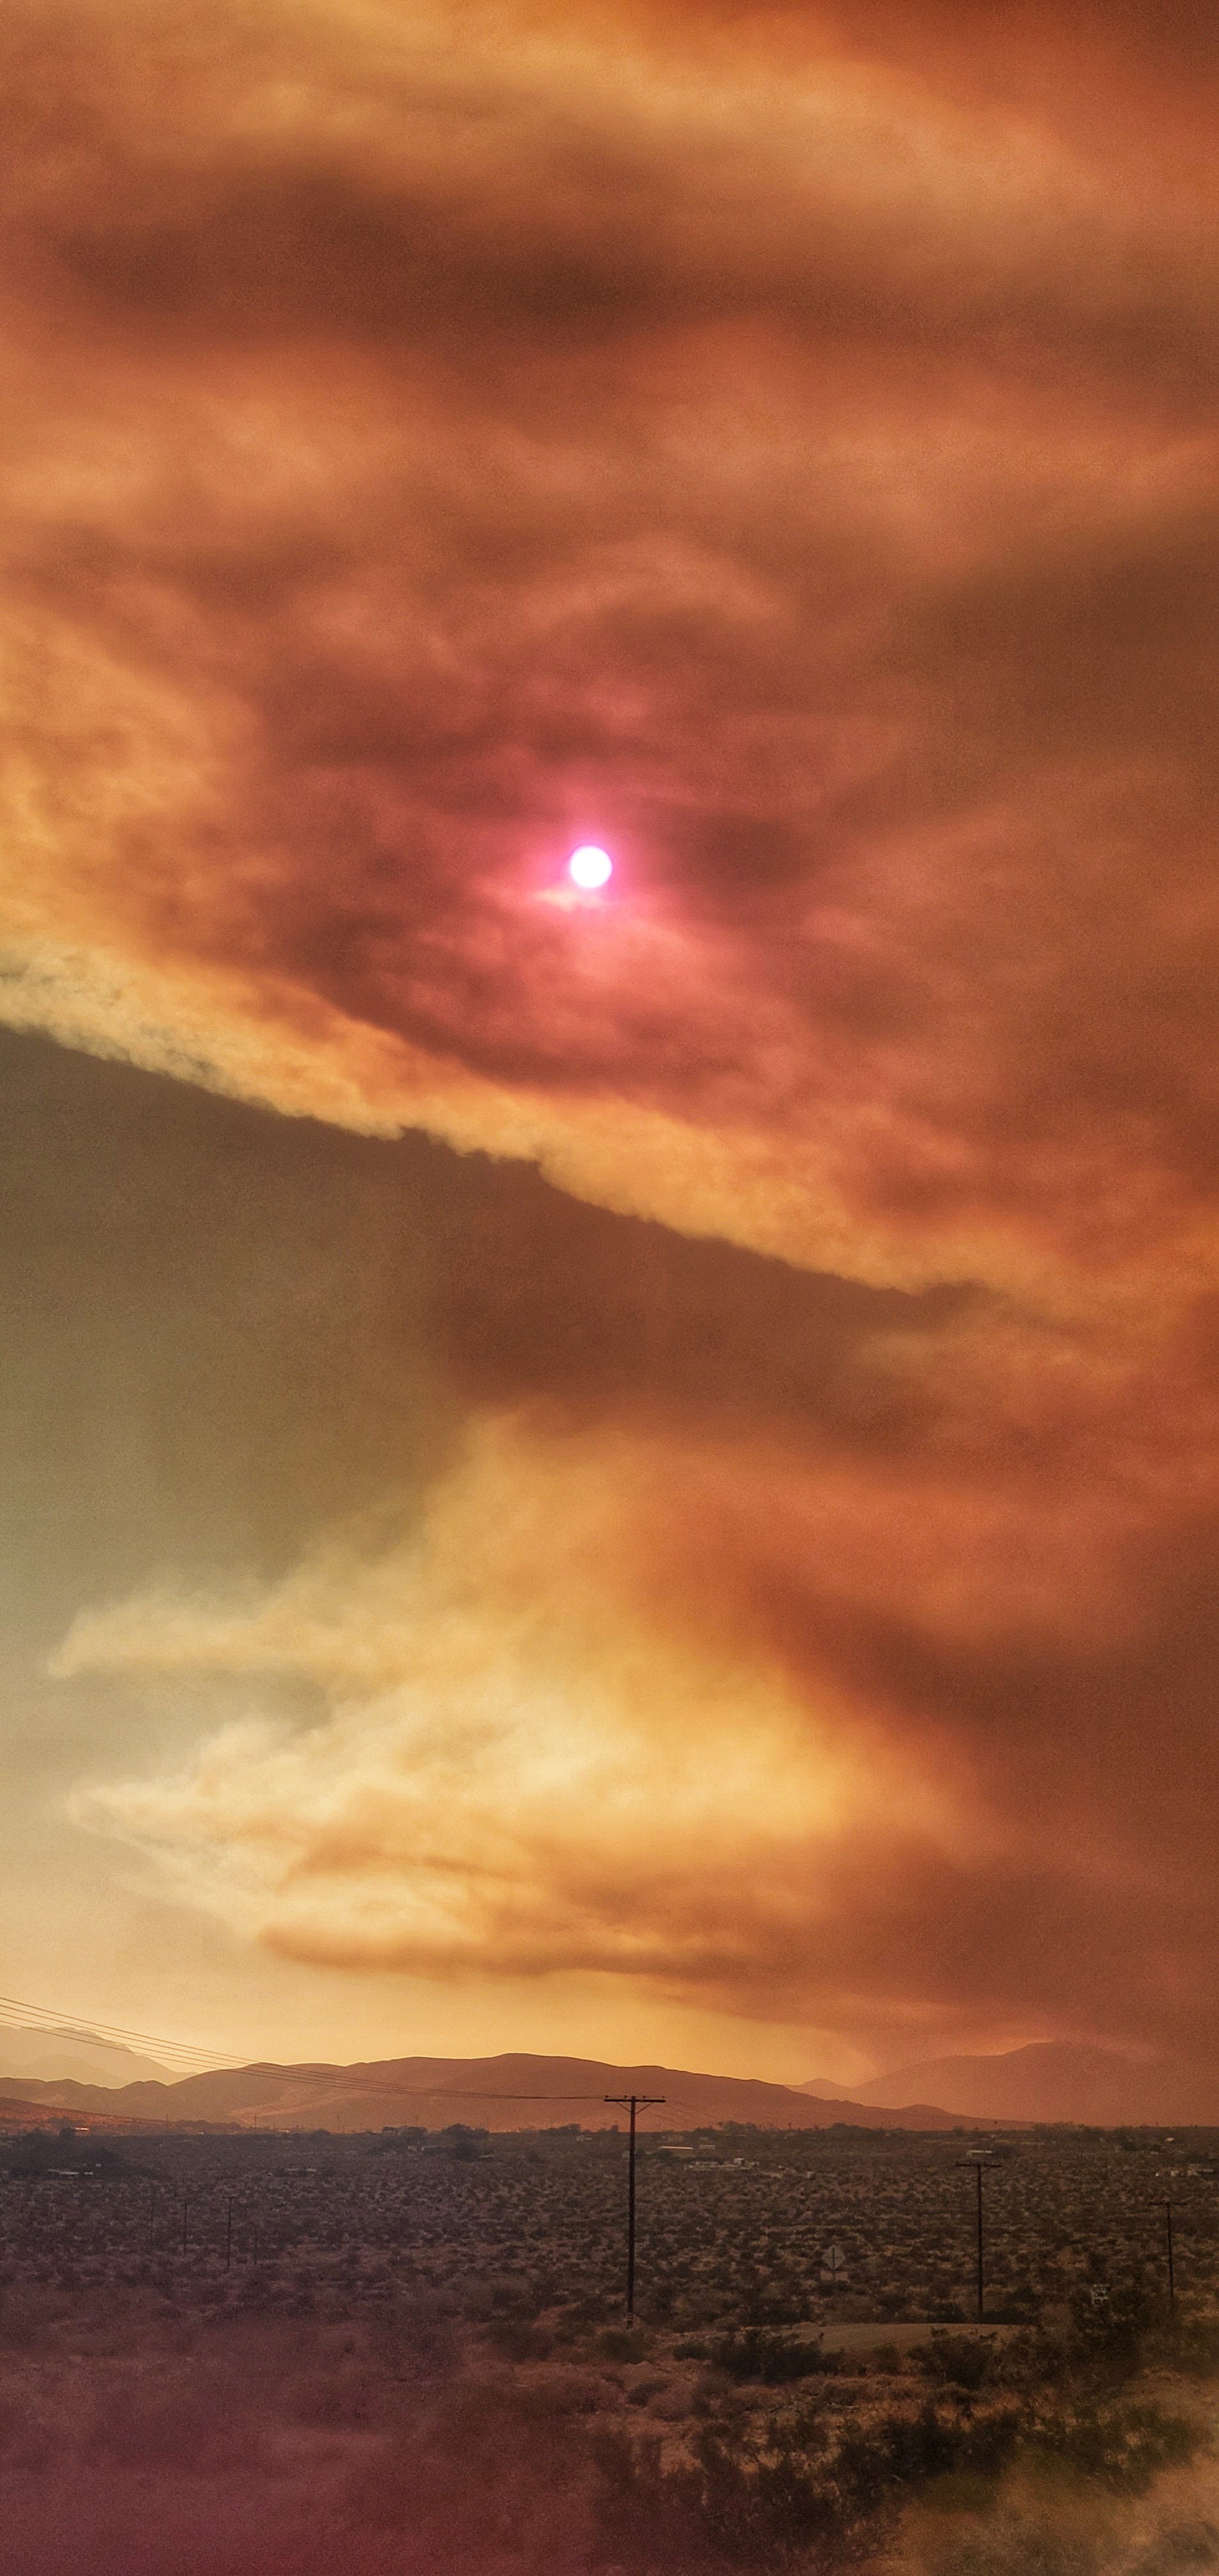 Jeff Frost captured this shot California's smoke-filled skies. Photo courtesy of the artist.